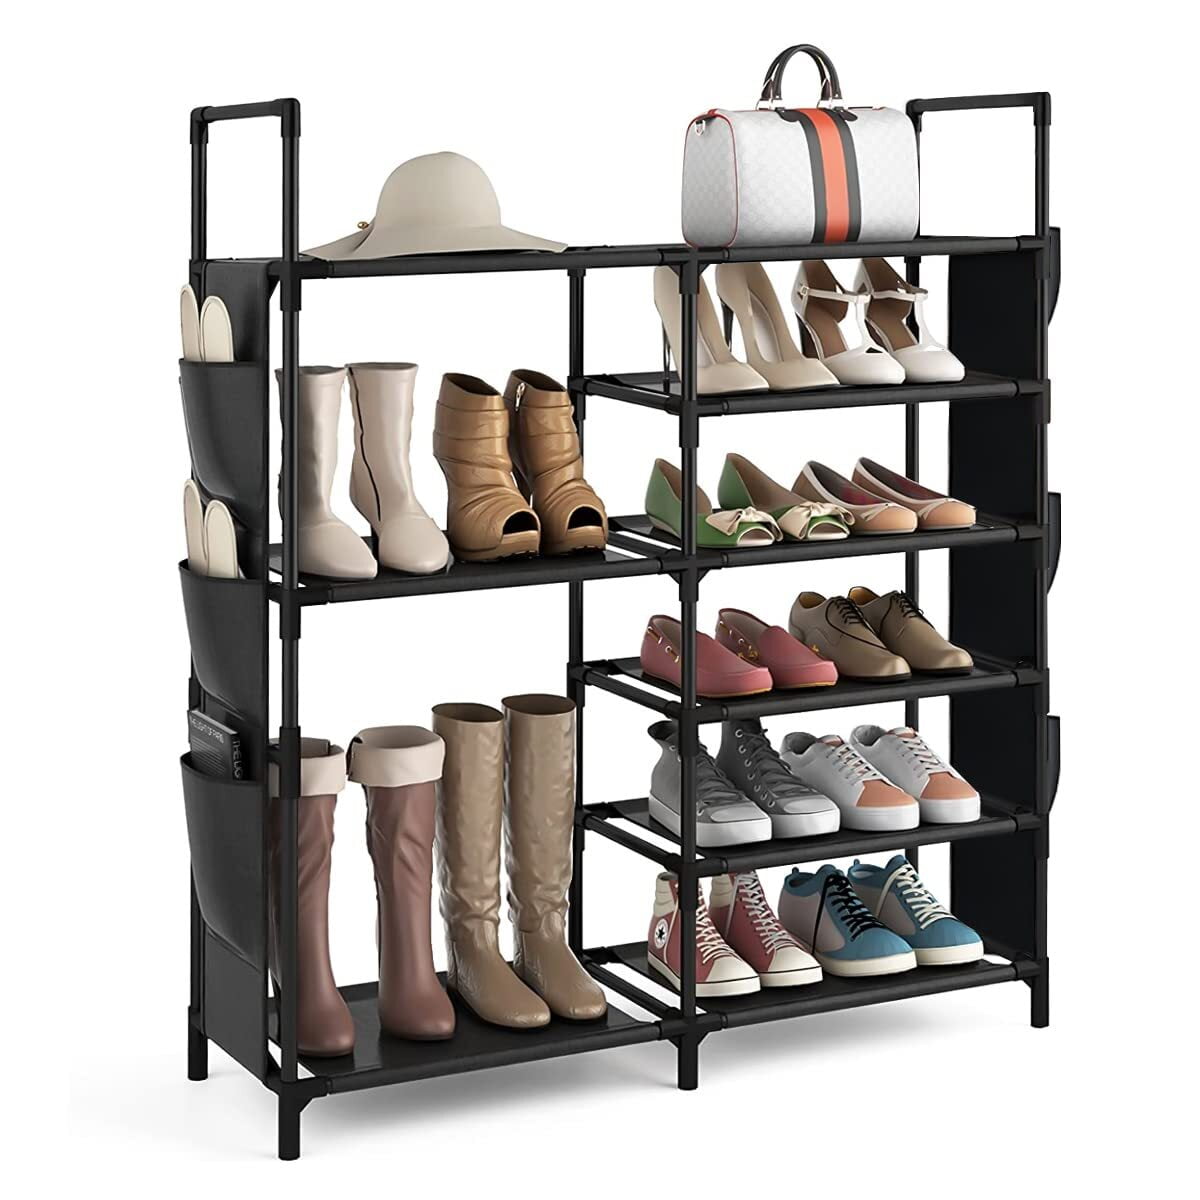 22.5 H 8-Pair 2-Tier Brown Recycled Materials Shoe Rack ME001 - The Home  Depot